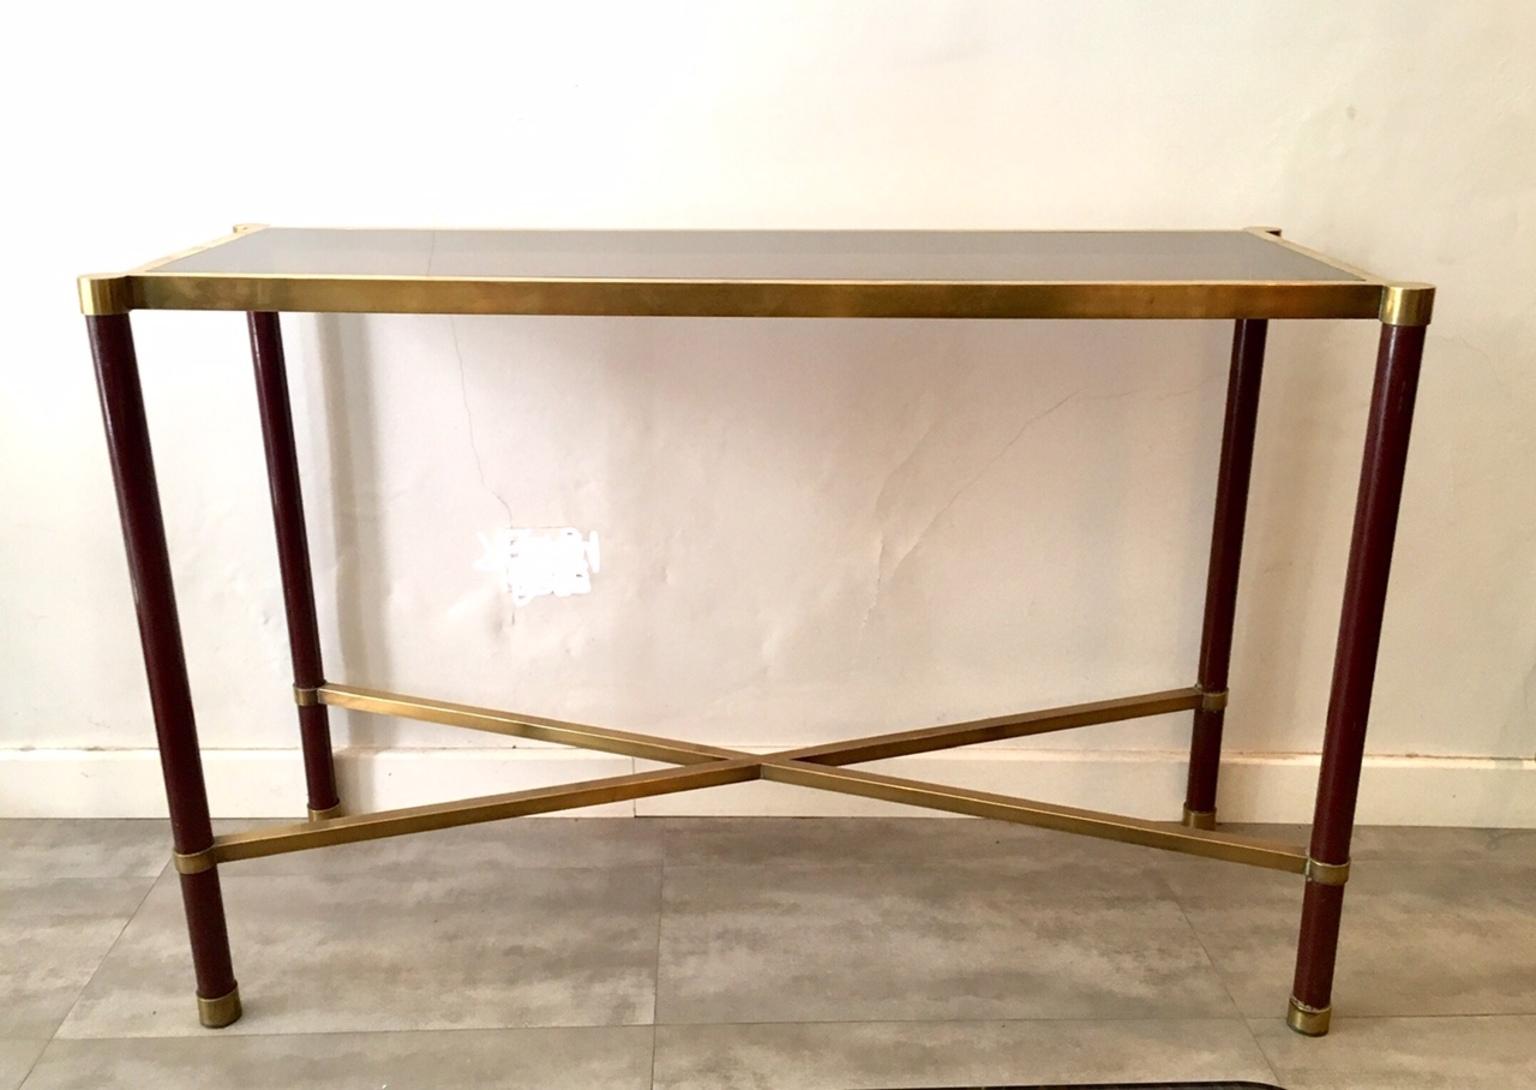 Guy Lefevre design console in lacquered metal in a maroon color with some parts in gold brass, the lid is smoked glass and the bottom in the form of x.